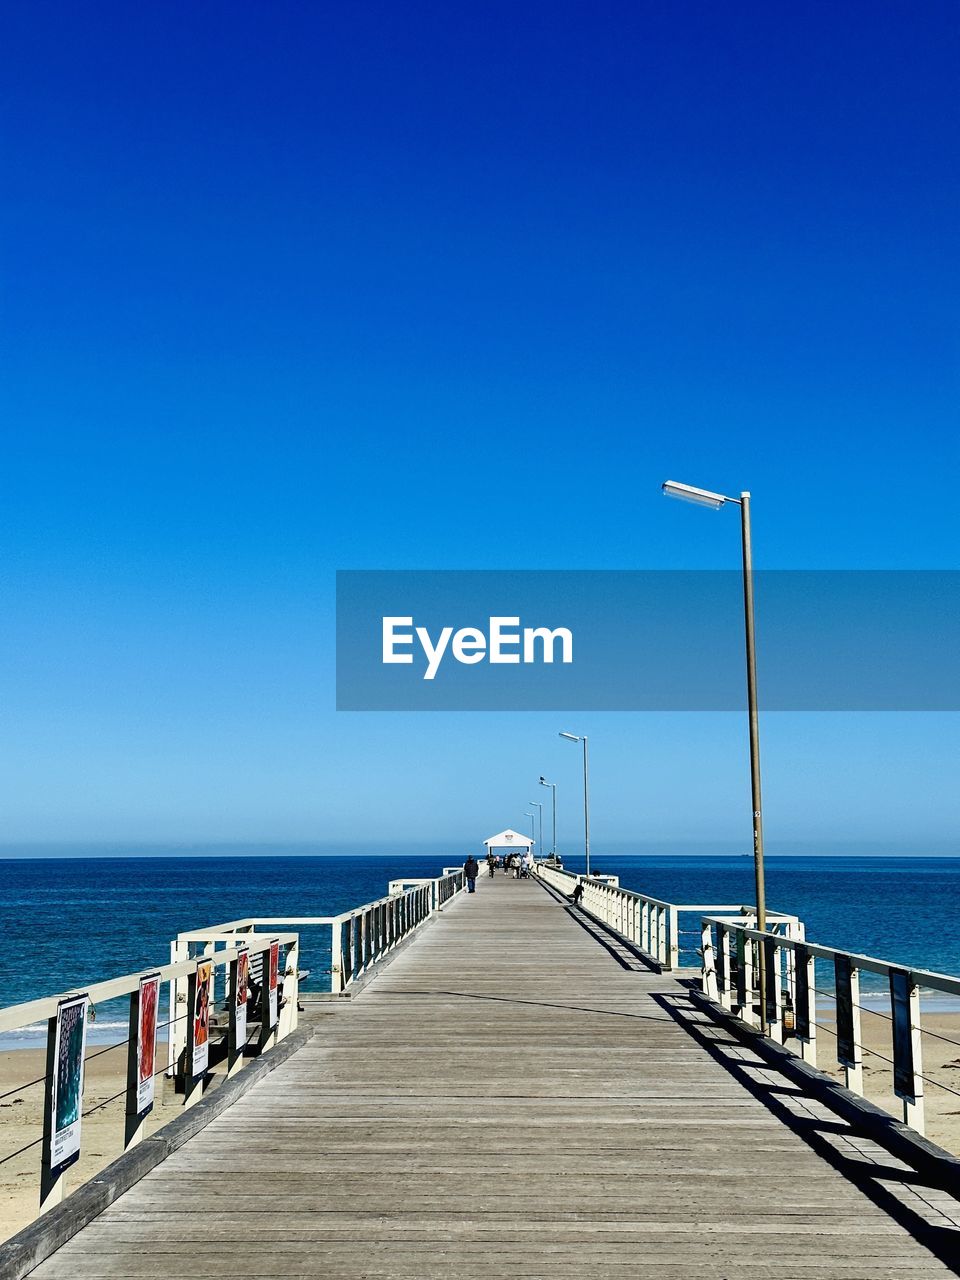 water, sky, sea, walkway, ocean, horizon over water, horizon, clear sky, pier, coast, blue, boardwalk, nature, the way forward, beach, scenics - nature, beauty in nature, shore, land, tranquility, vacation, tranquil scene, railing, sunny, wood, copy space, sunlight, day, diminishing perspective, idyllic, architecture, transportation, no people, jetty, outdoors, travel destinations, travel, footpath, holiday, summer, dock, bay, trip, seascape, built structure, vanishing point, non-urban scene, urban skyline, body of water, tourism